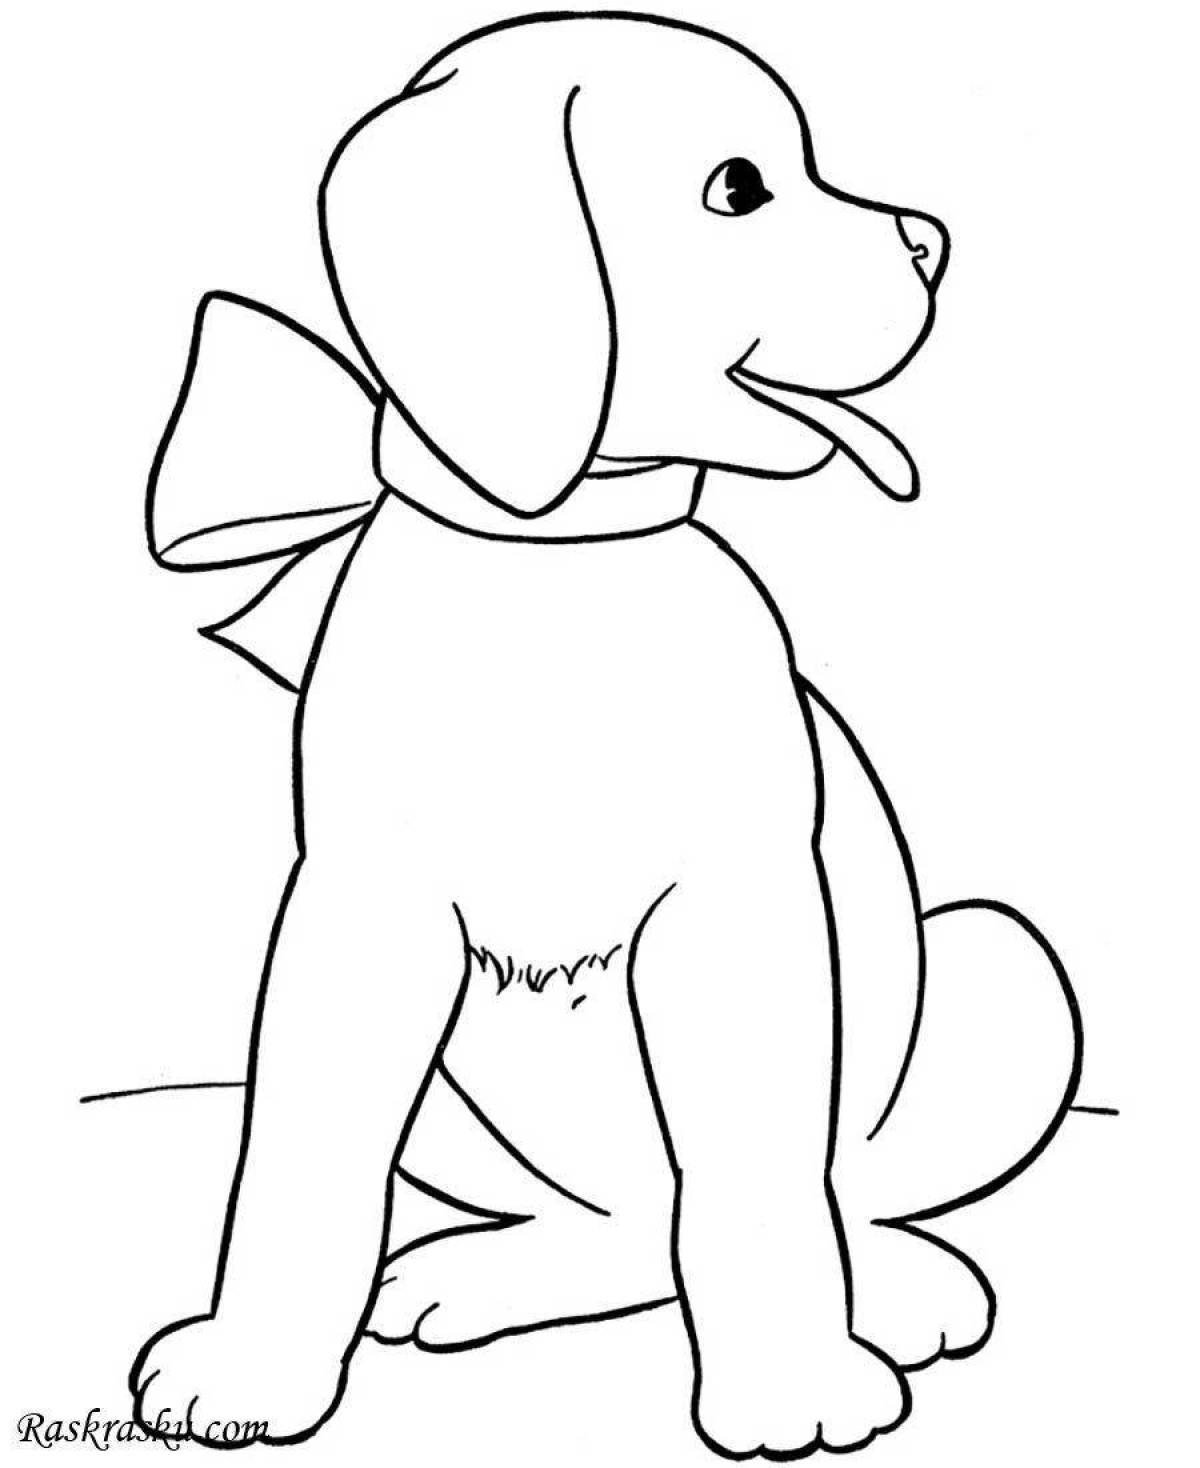 Live dog coloring for children 4-5 years old